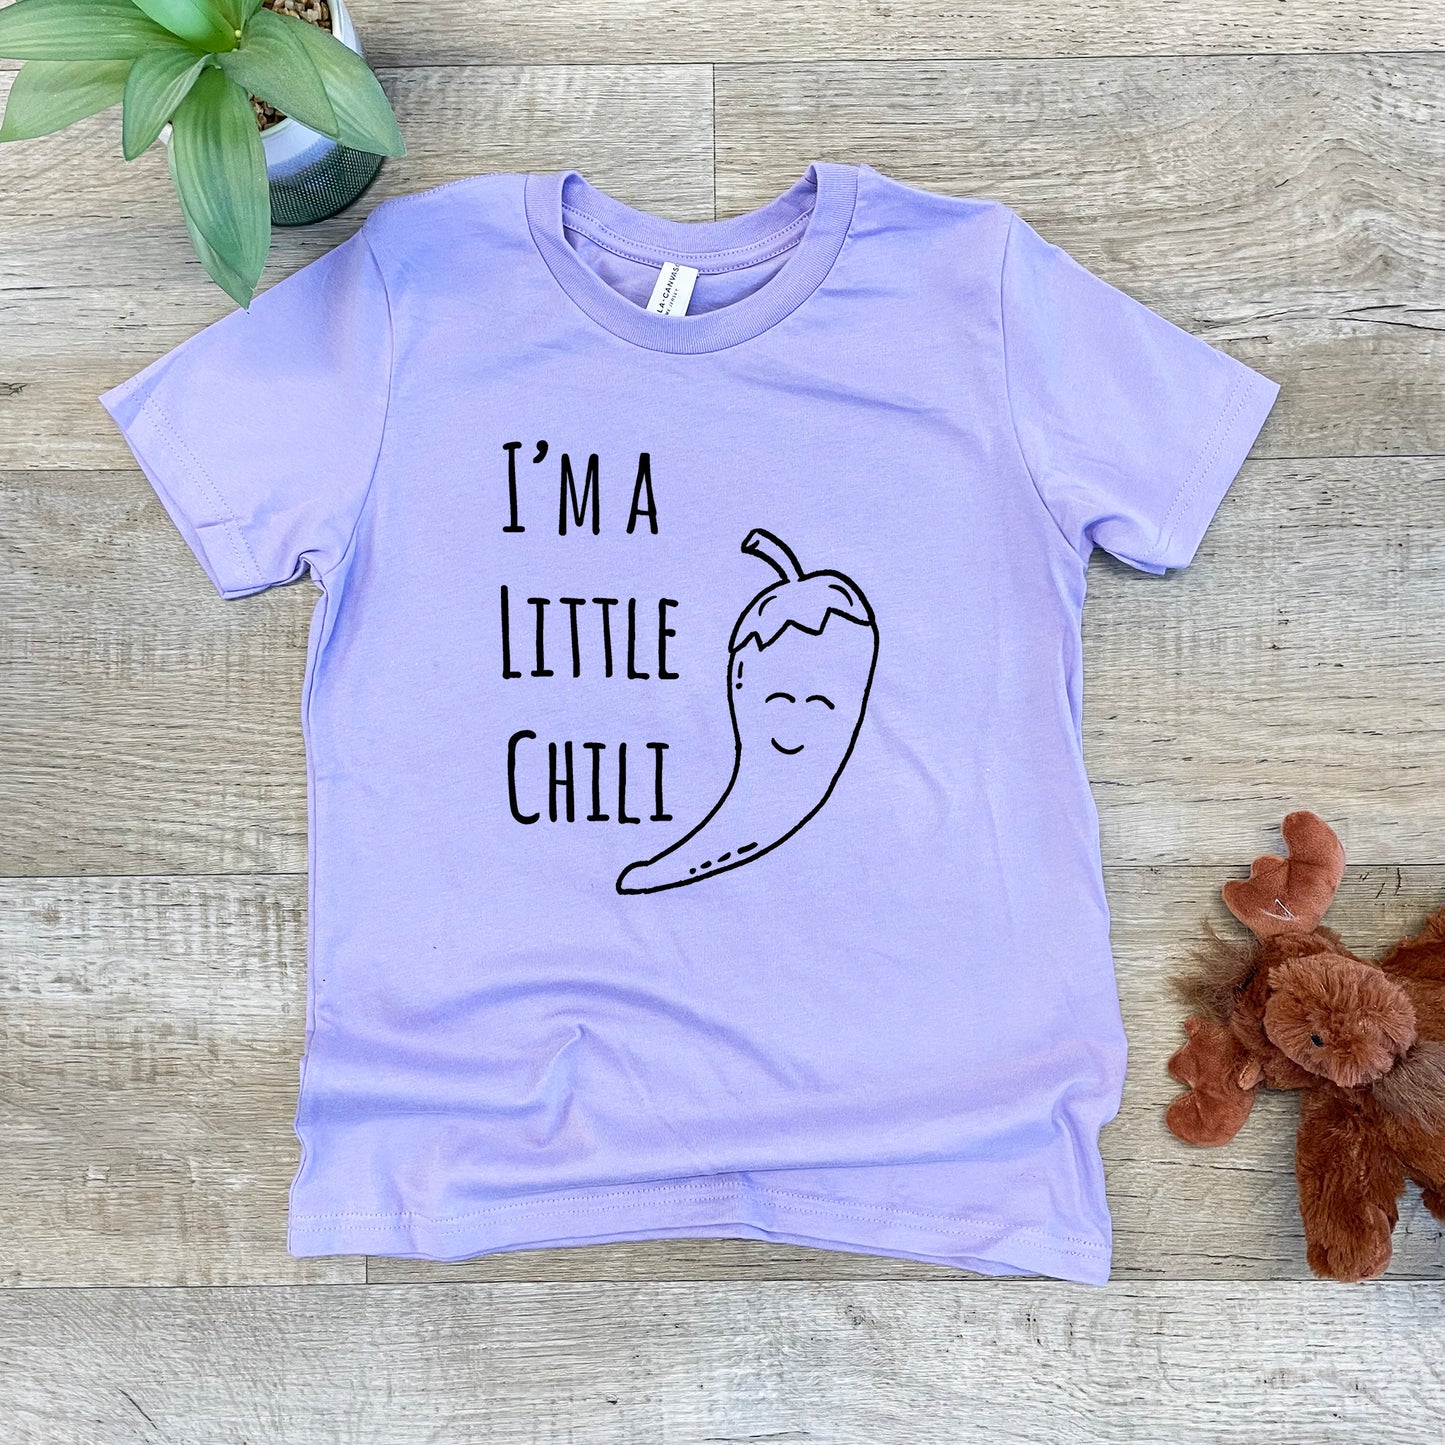 I'm A Little Chili - Kid's Tee - Columbia Blue or Lavender